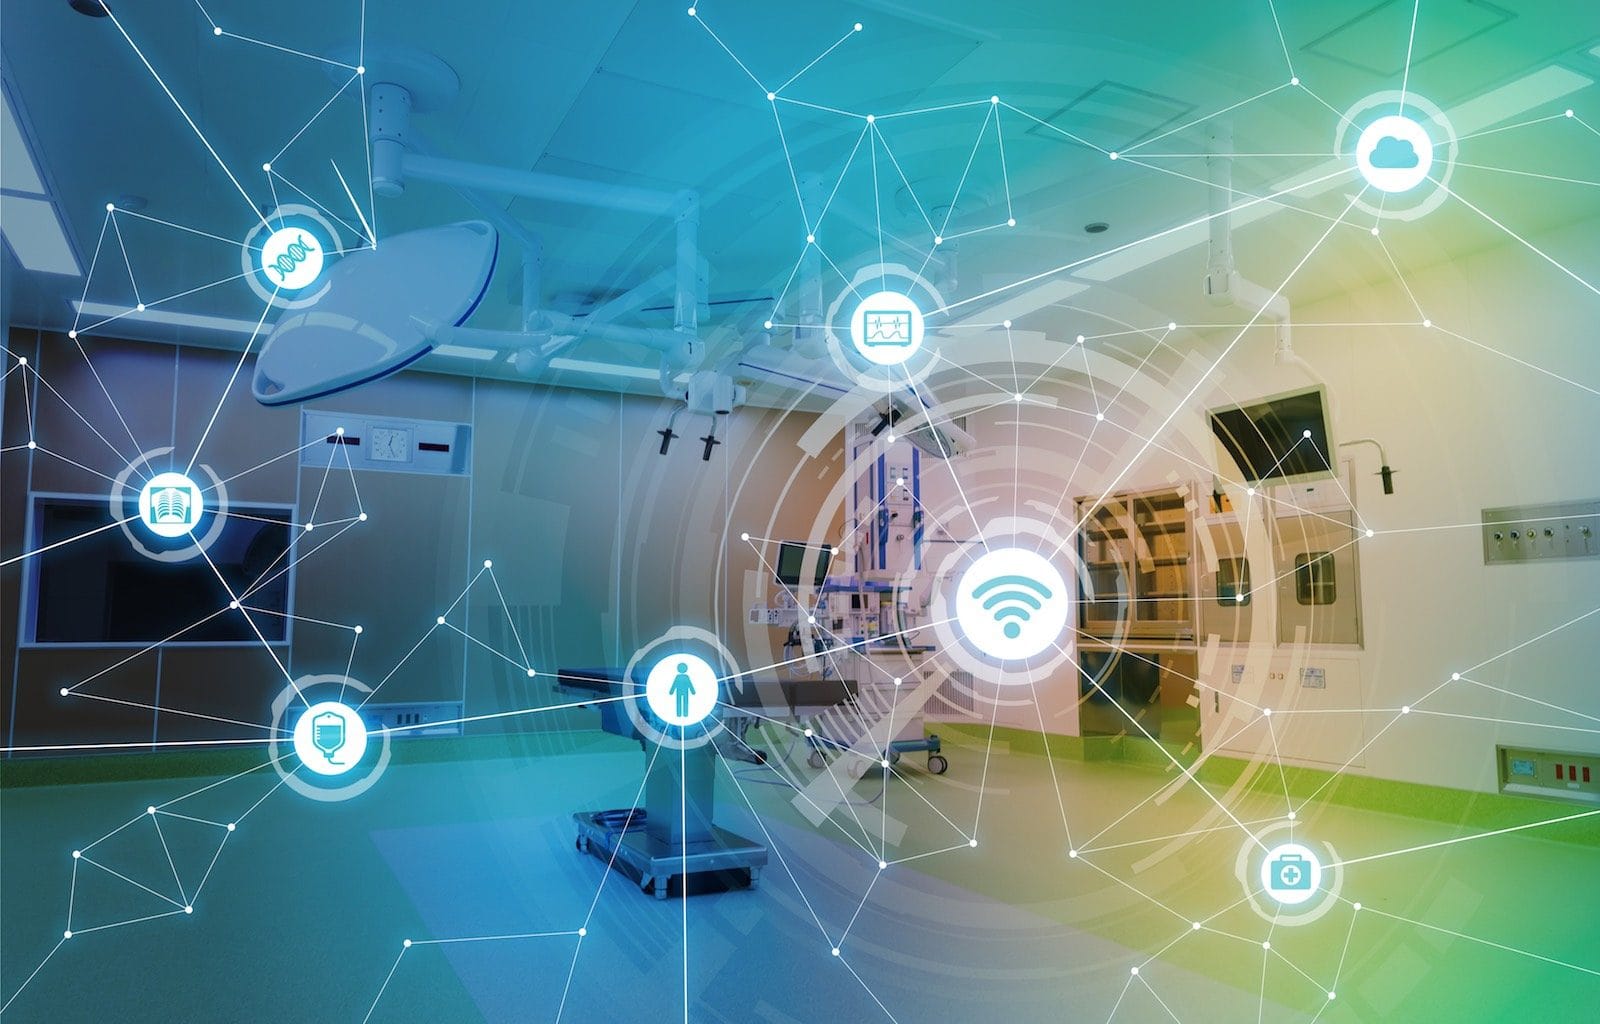 IoT in healthcare in hospitals illustration